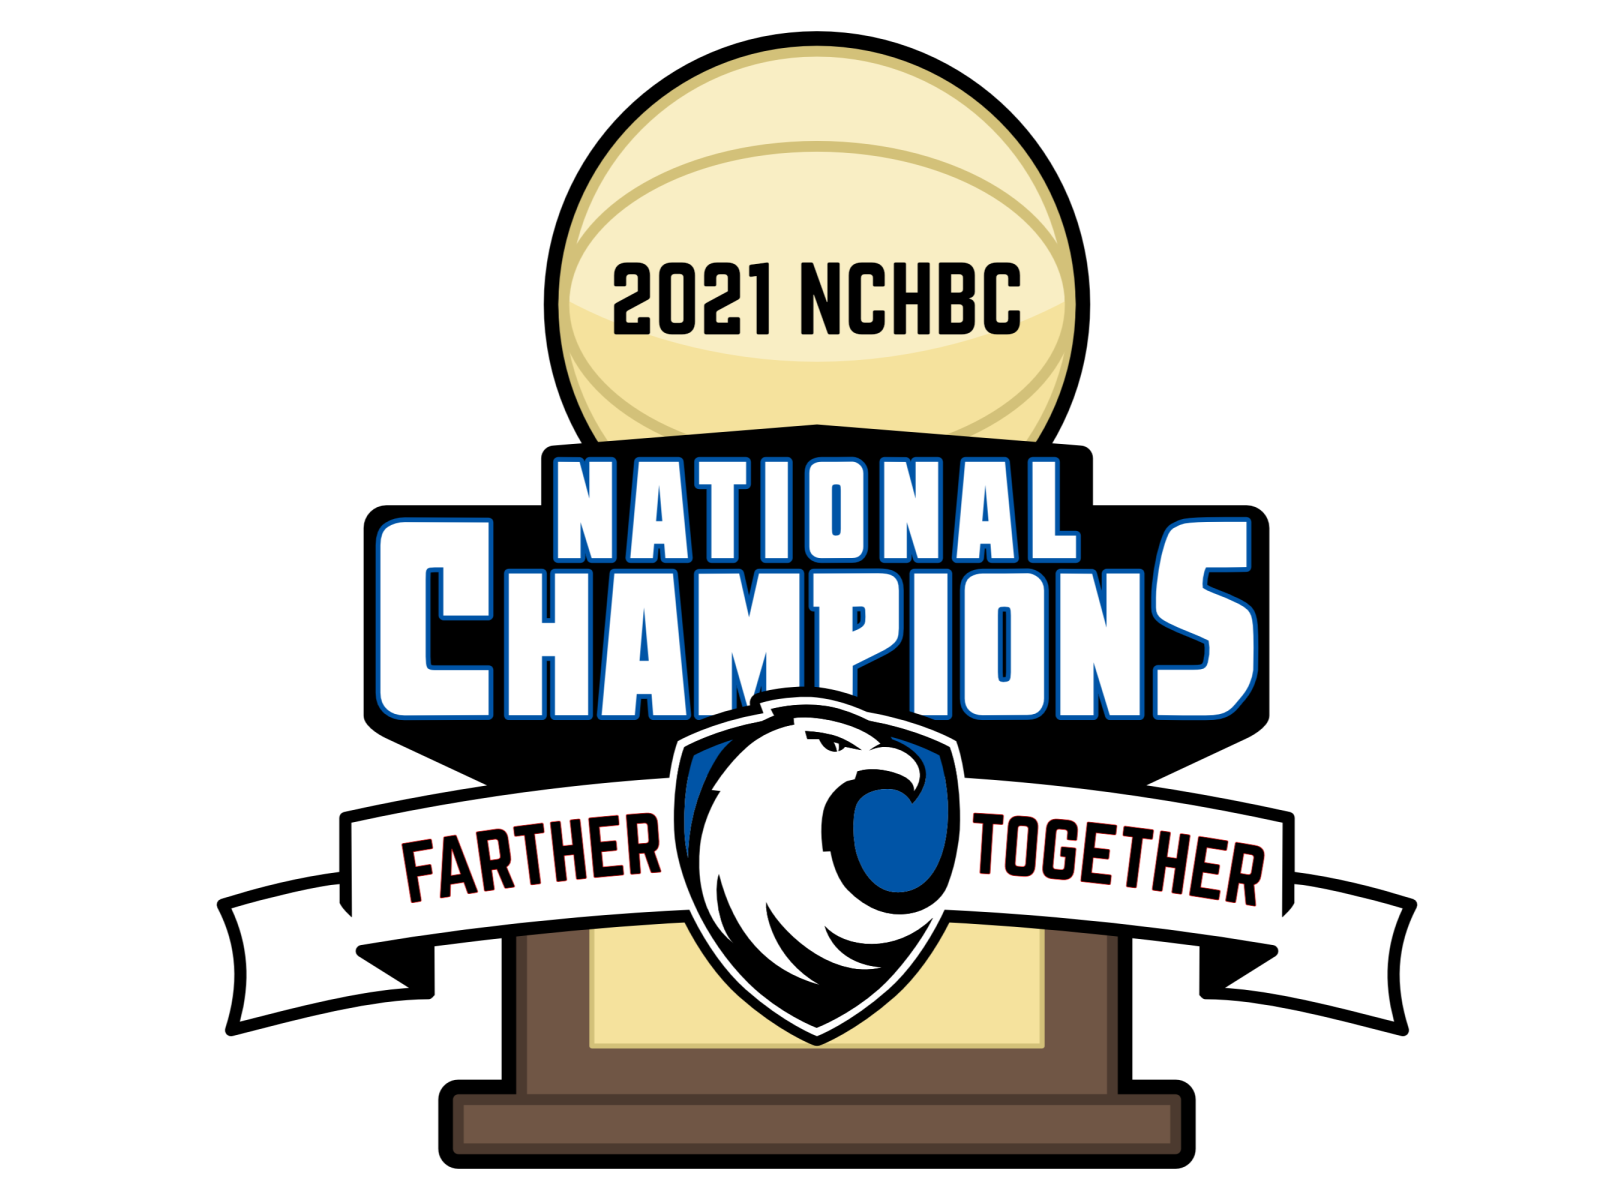 2021 NCHBC National Champions by Phil Robinson on Dribbble